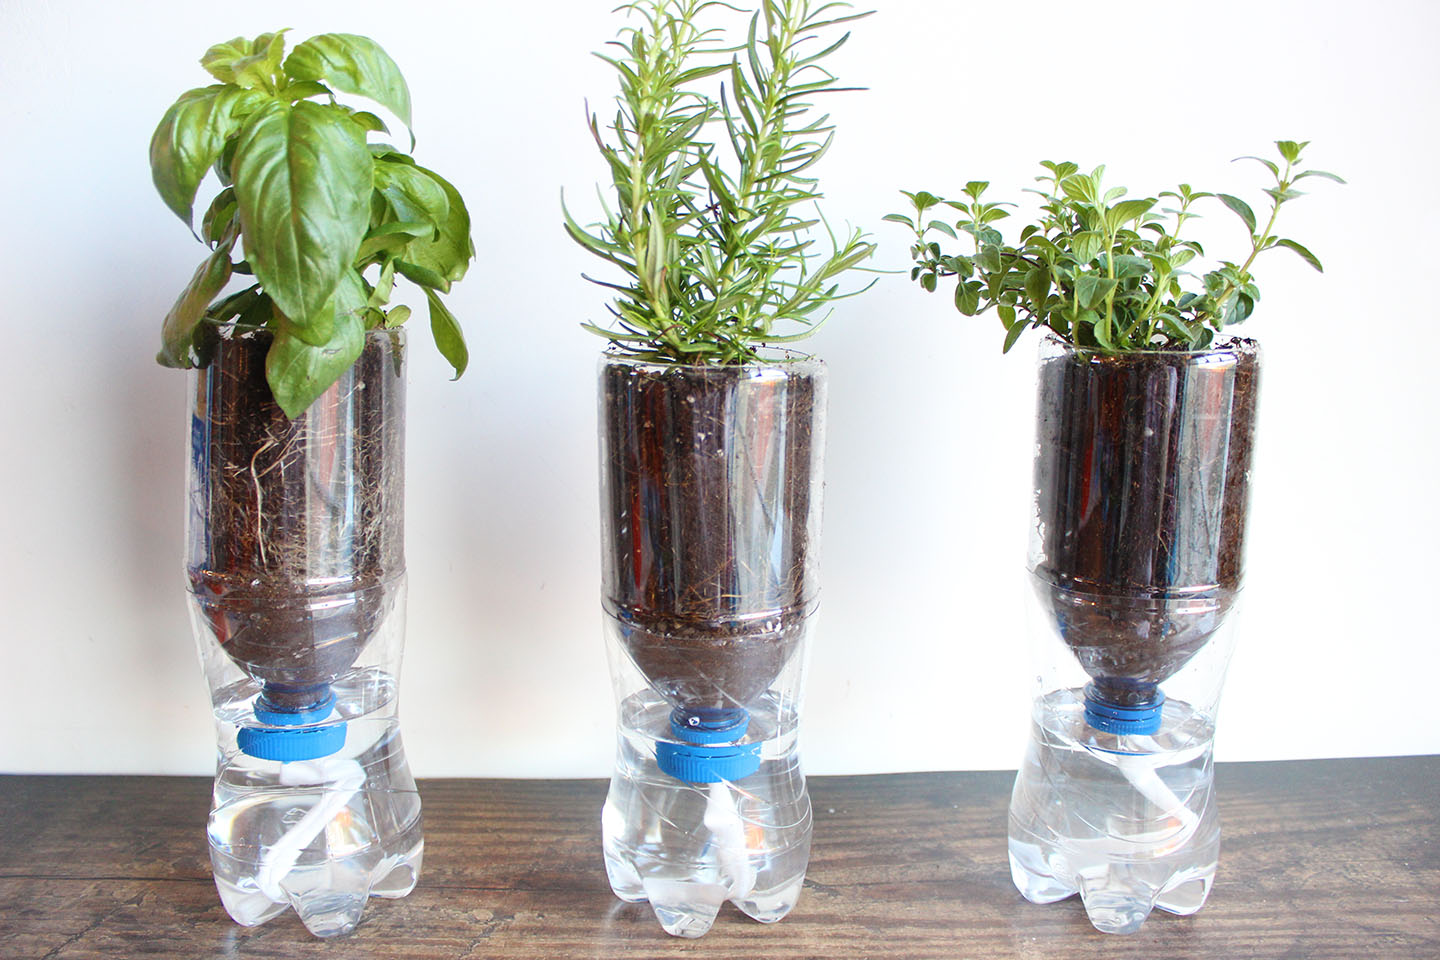 How to Make DIY Self-Watering Planters